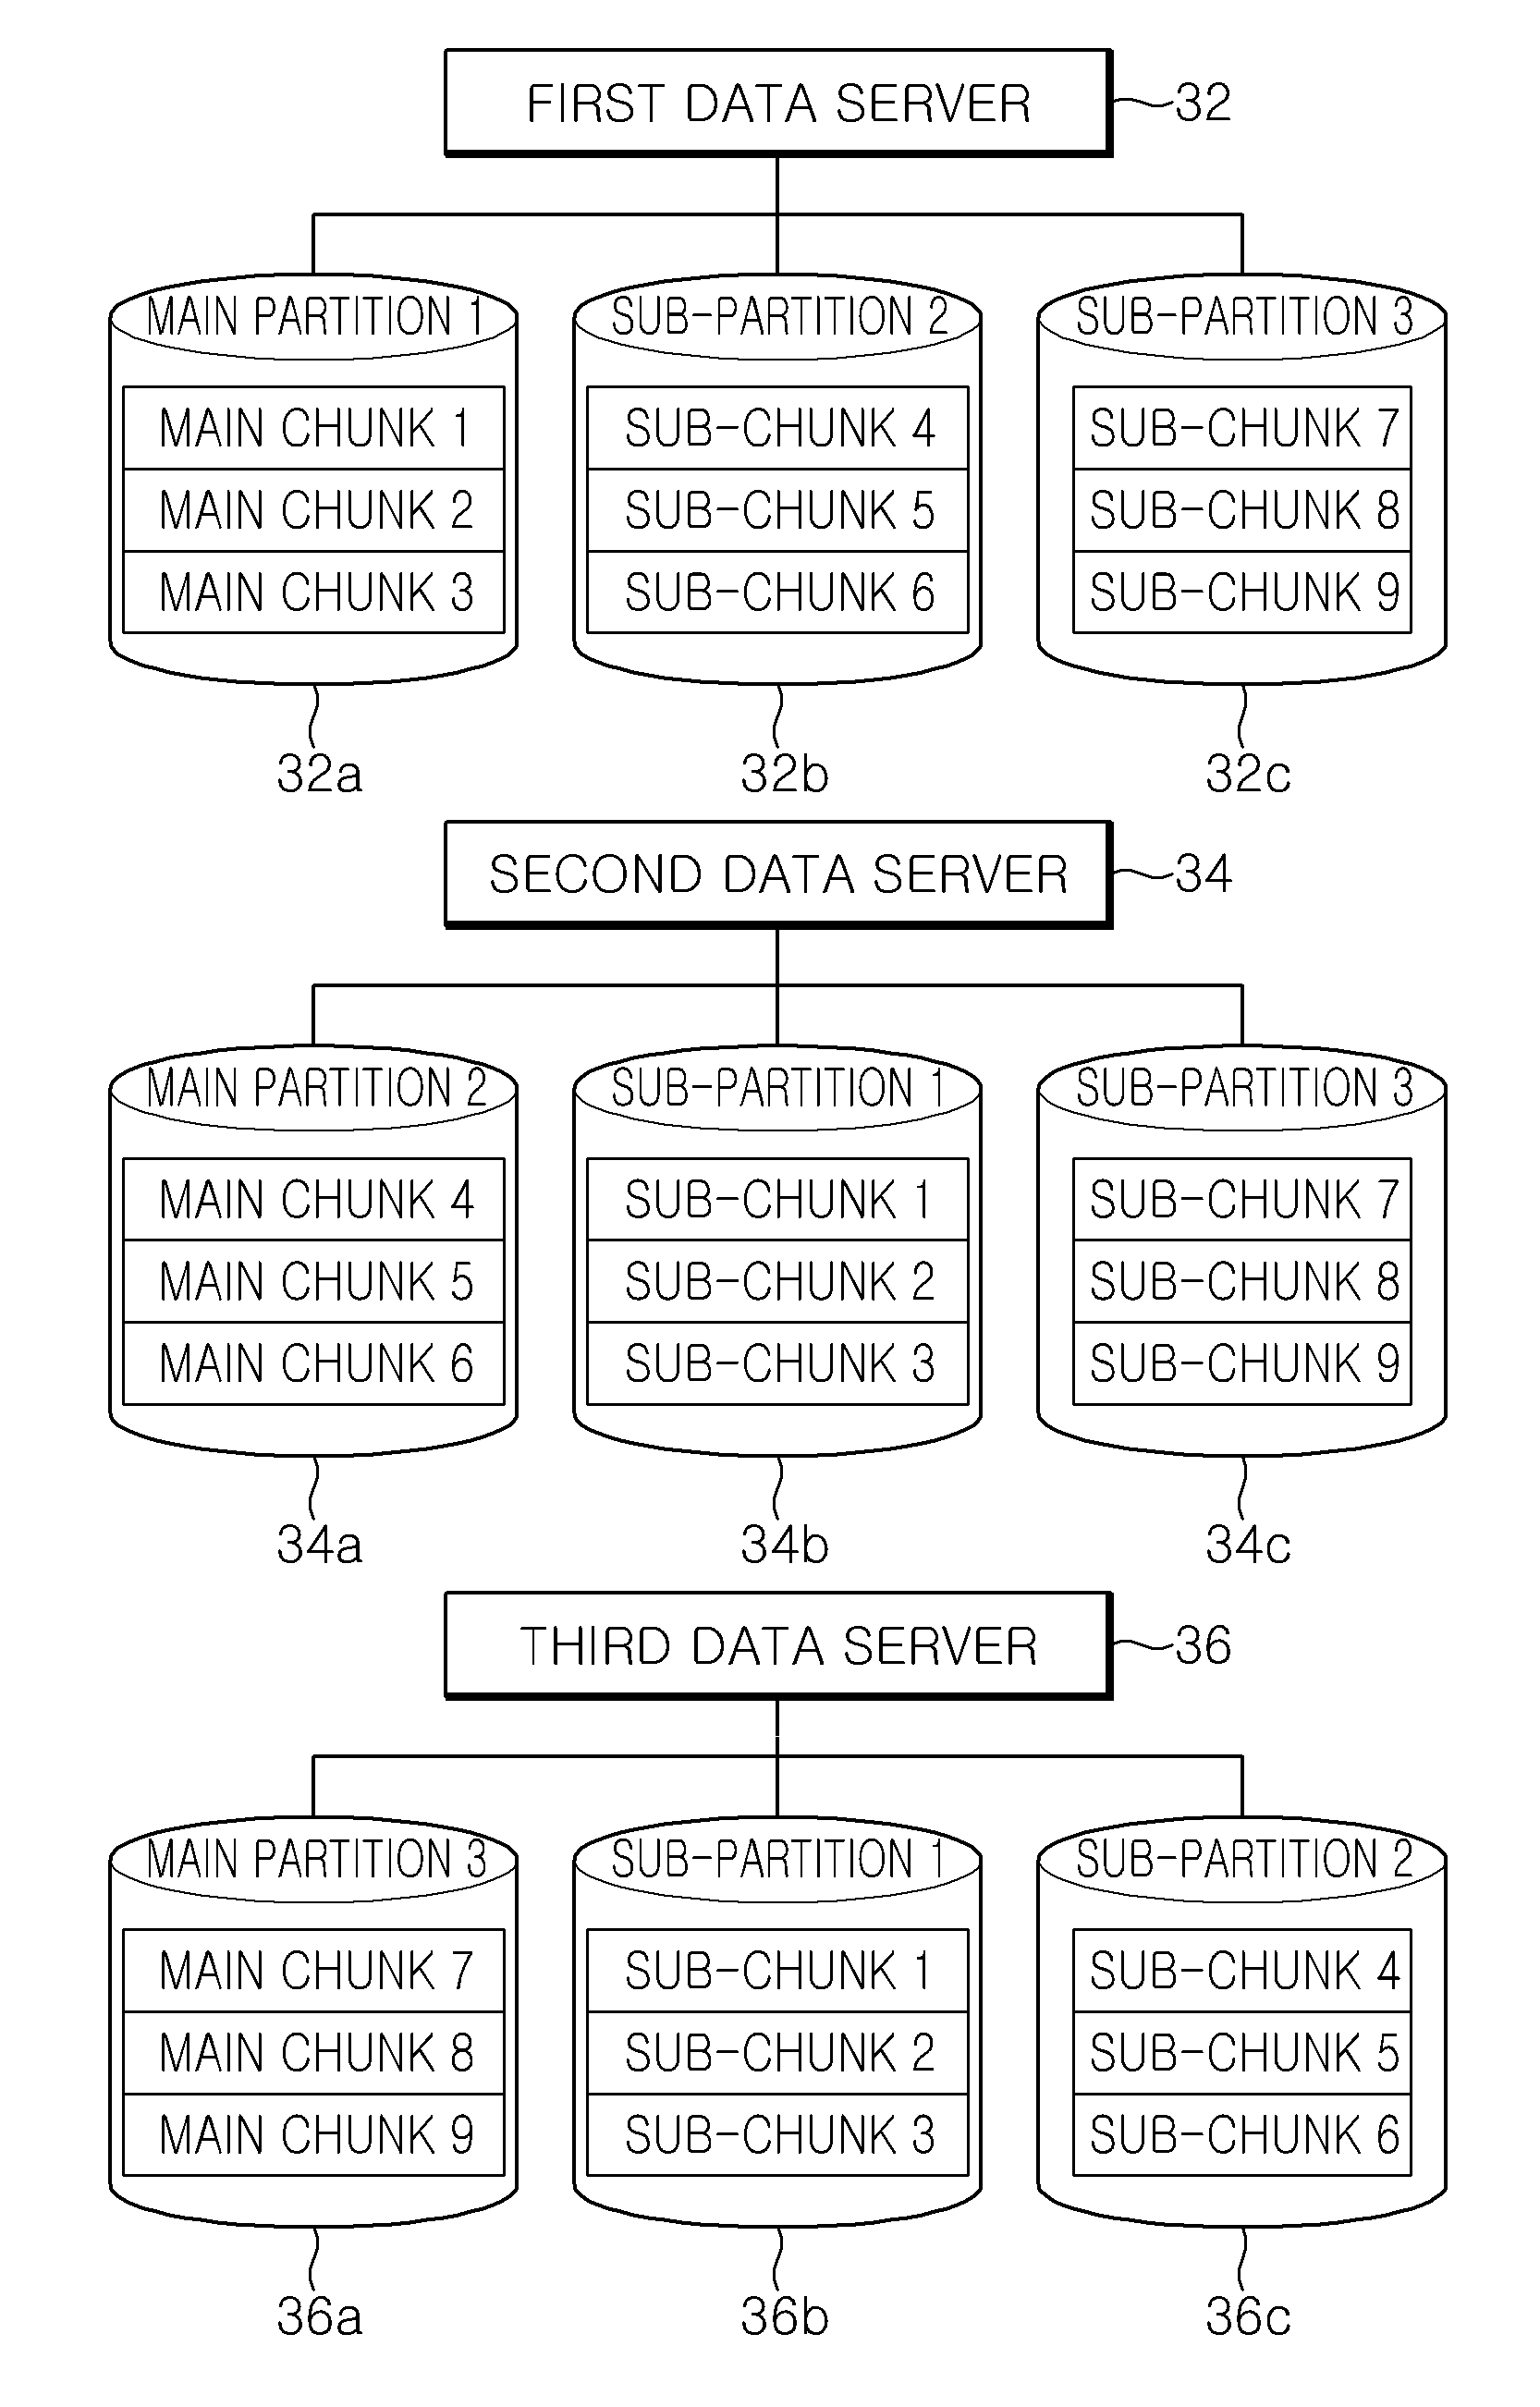 Data replication and recovery method in asymmetric clustered distributed file system